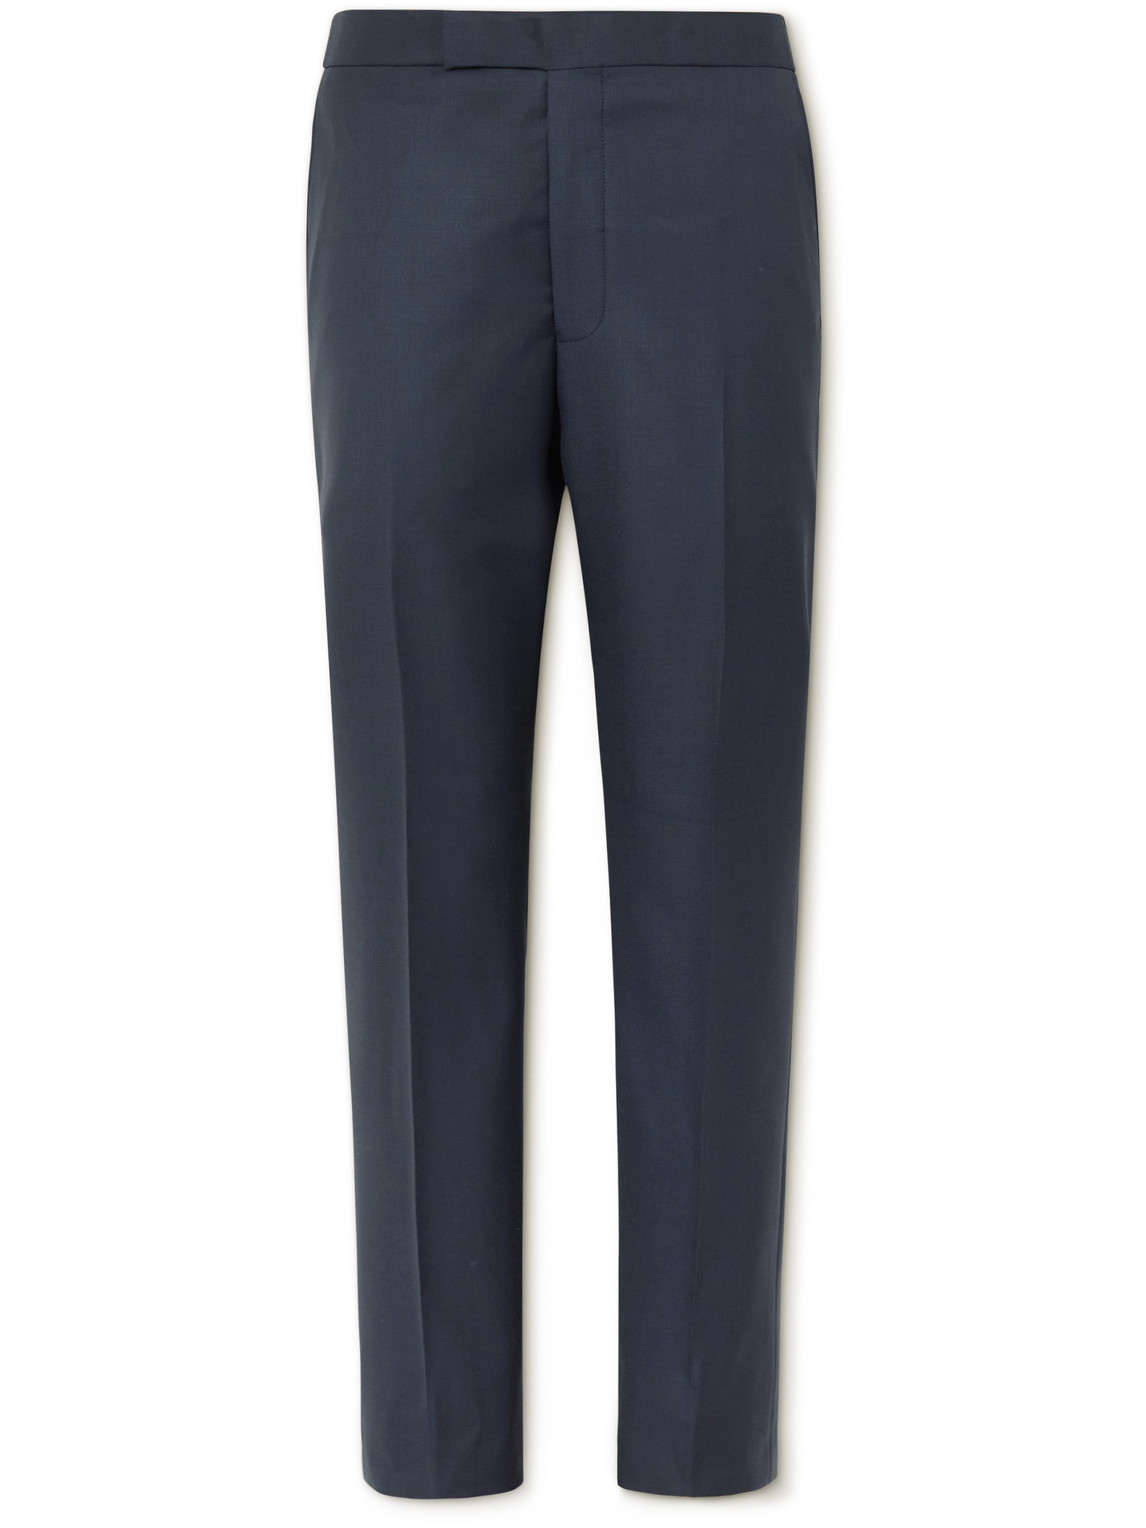 Richard James Tapered Sharkskin Wool Suit Trousers In Black